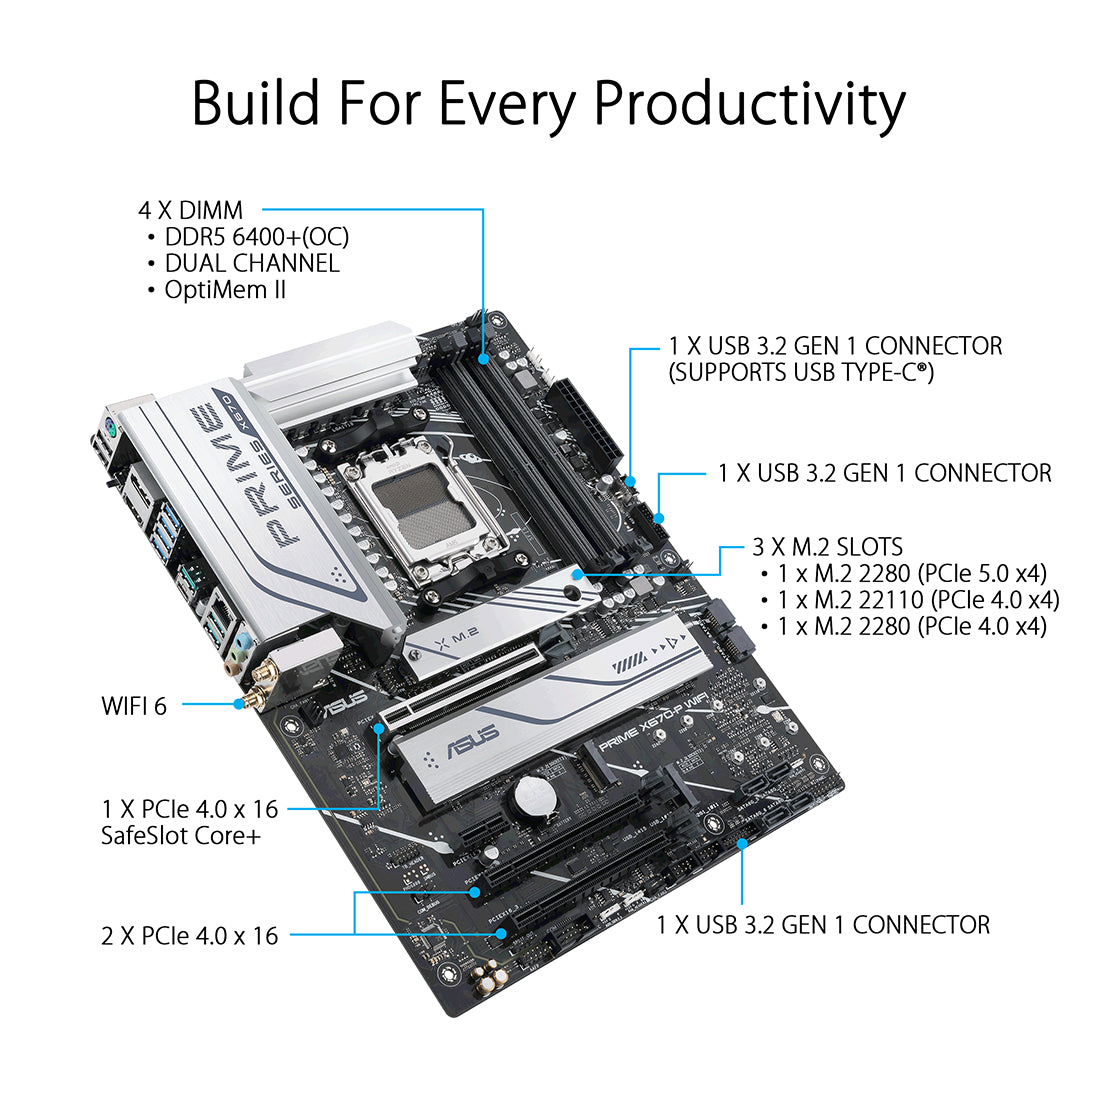 ASUS PRIME X670-P WIFI AMD Socket AM5 ATX Motherboard with PCIe 5.0 USB 4 Header and Three M.2 Slots